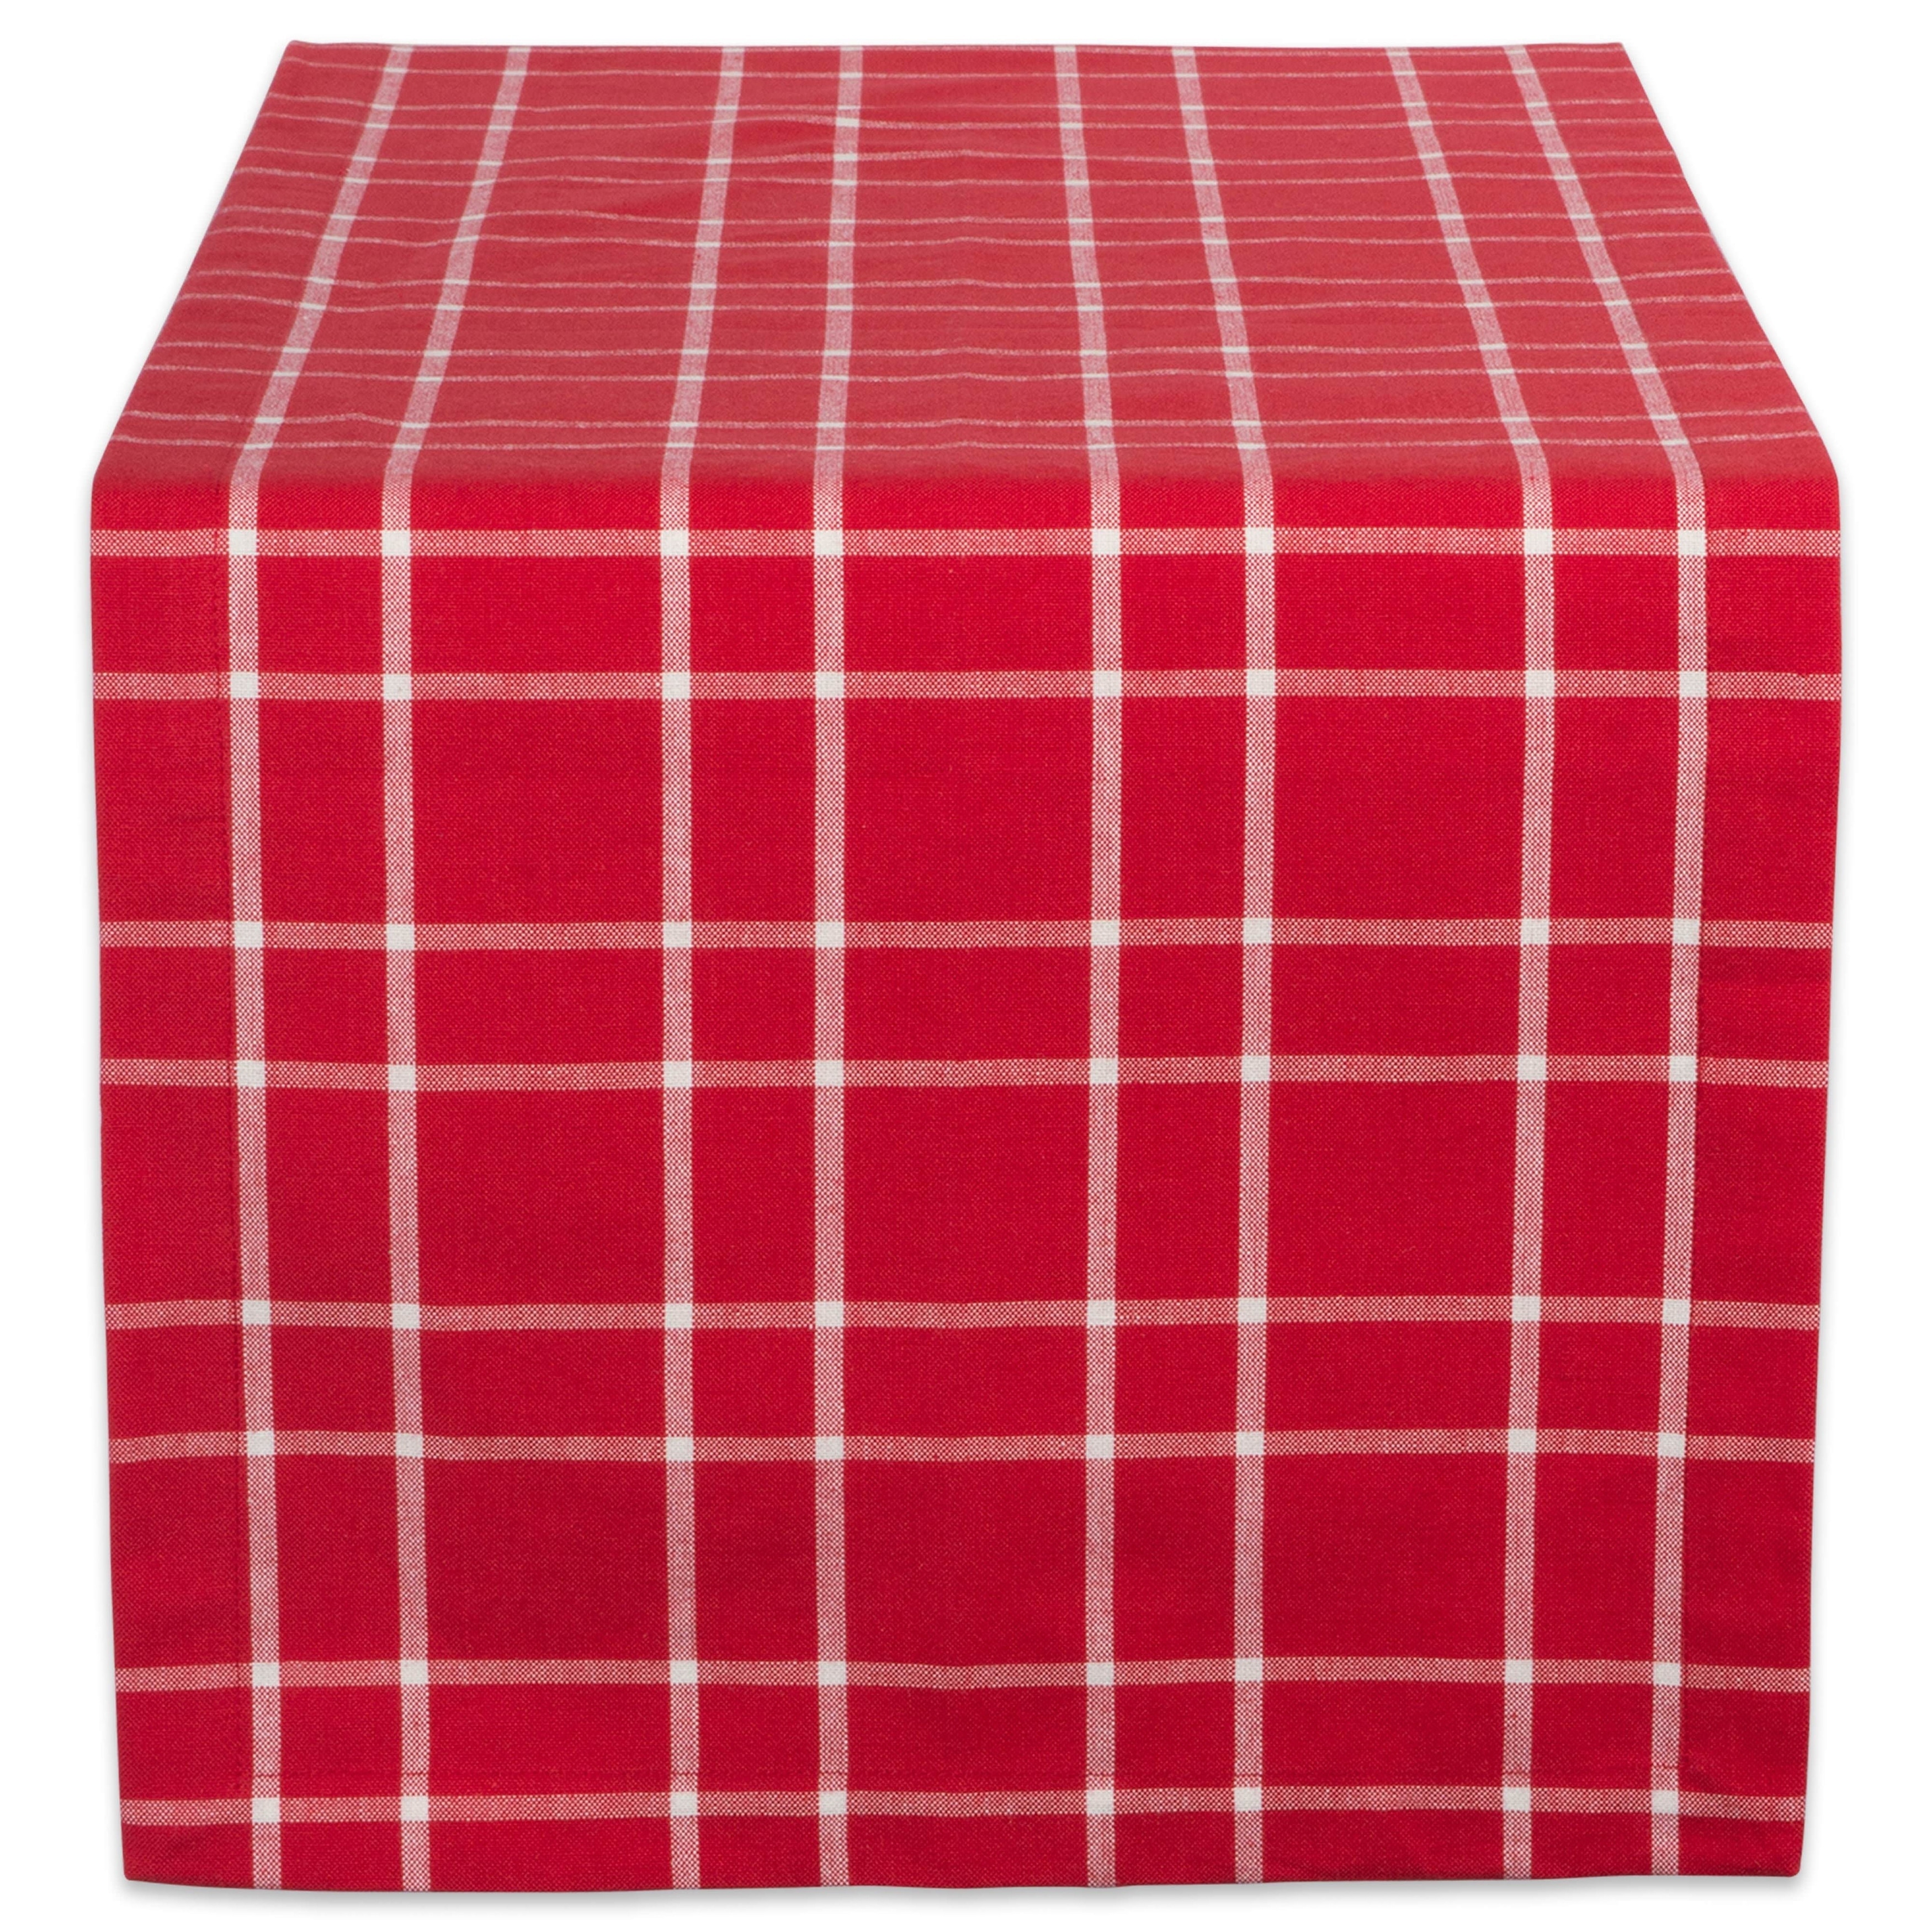 https://ak1.ostkcdn.com/images/products/22380362/Design-Imports-Holly-Berry-Plaid-Table-Runner-0.25-inches-high-x-14-inches-wide-x-72-inches-deep-376a690b-a7f9-4df3-b608-ddf395a29645.jpg